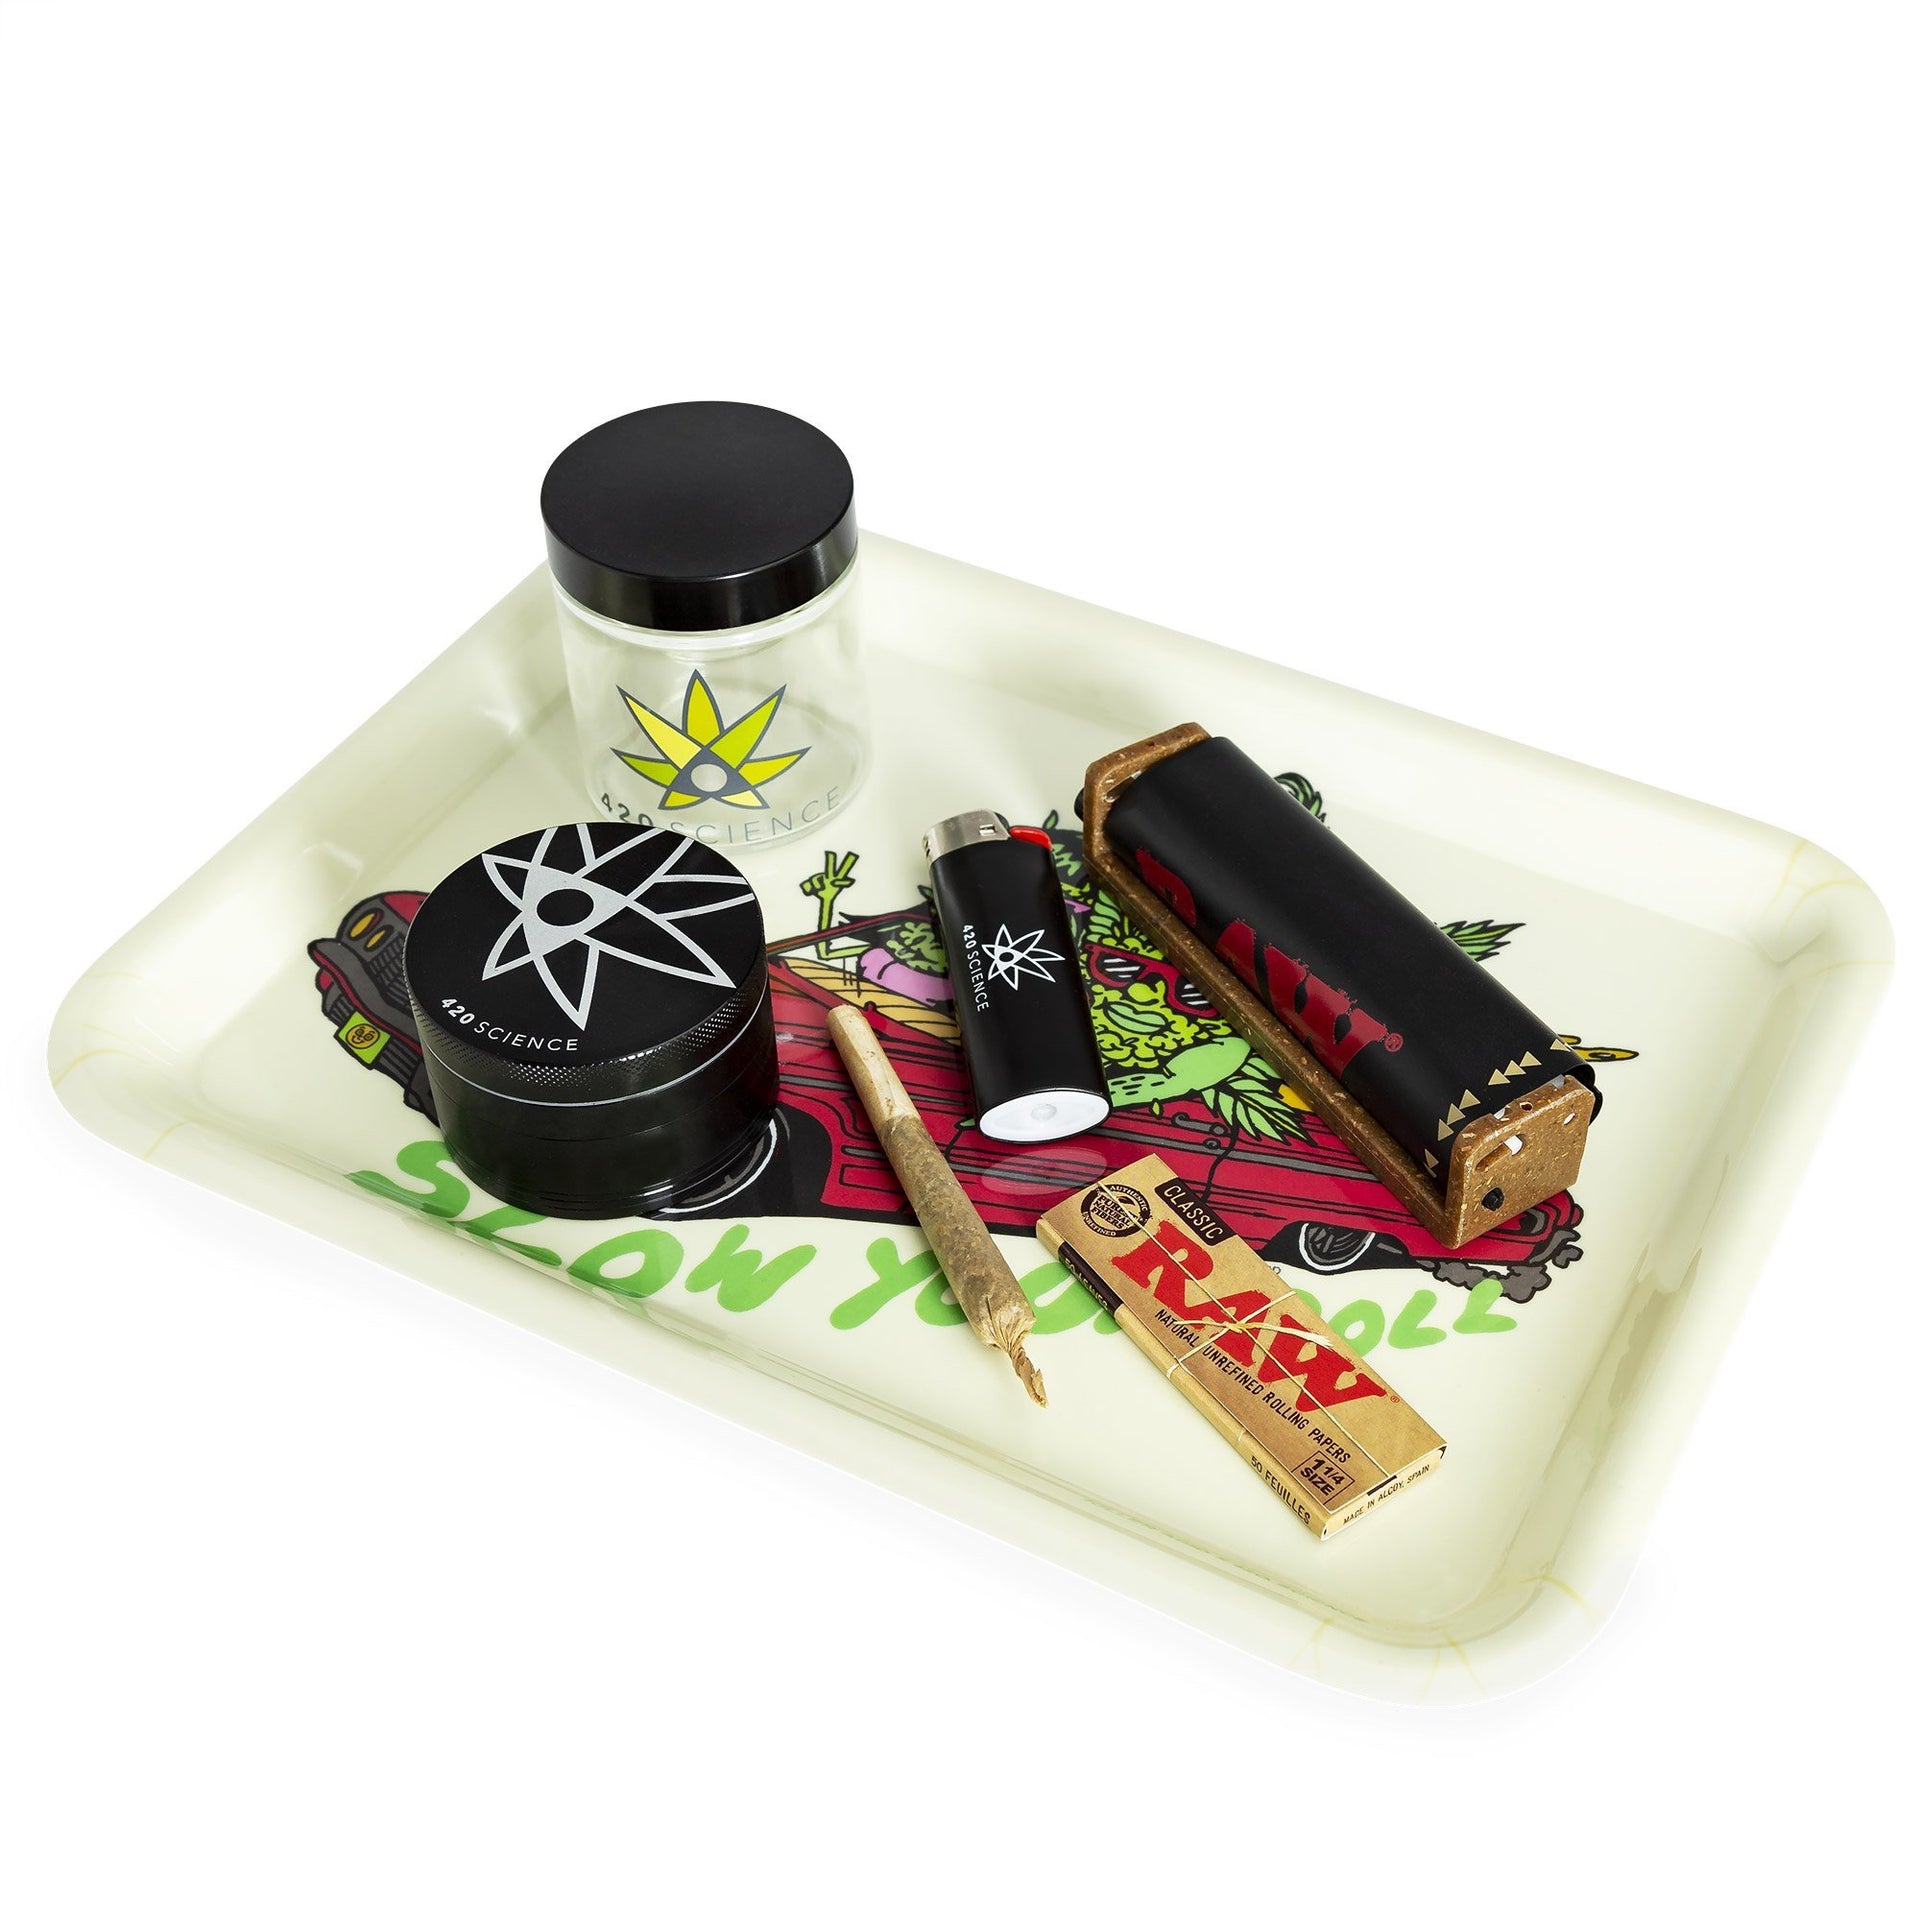 420 Science x Killer Acid Rolling Tray - Slow Your Roll / $ 14.99 at 420  Science